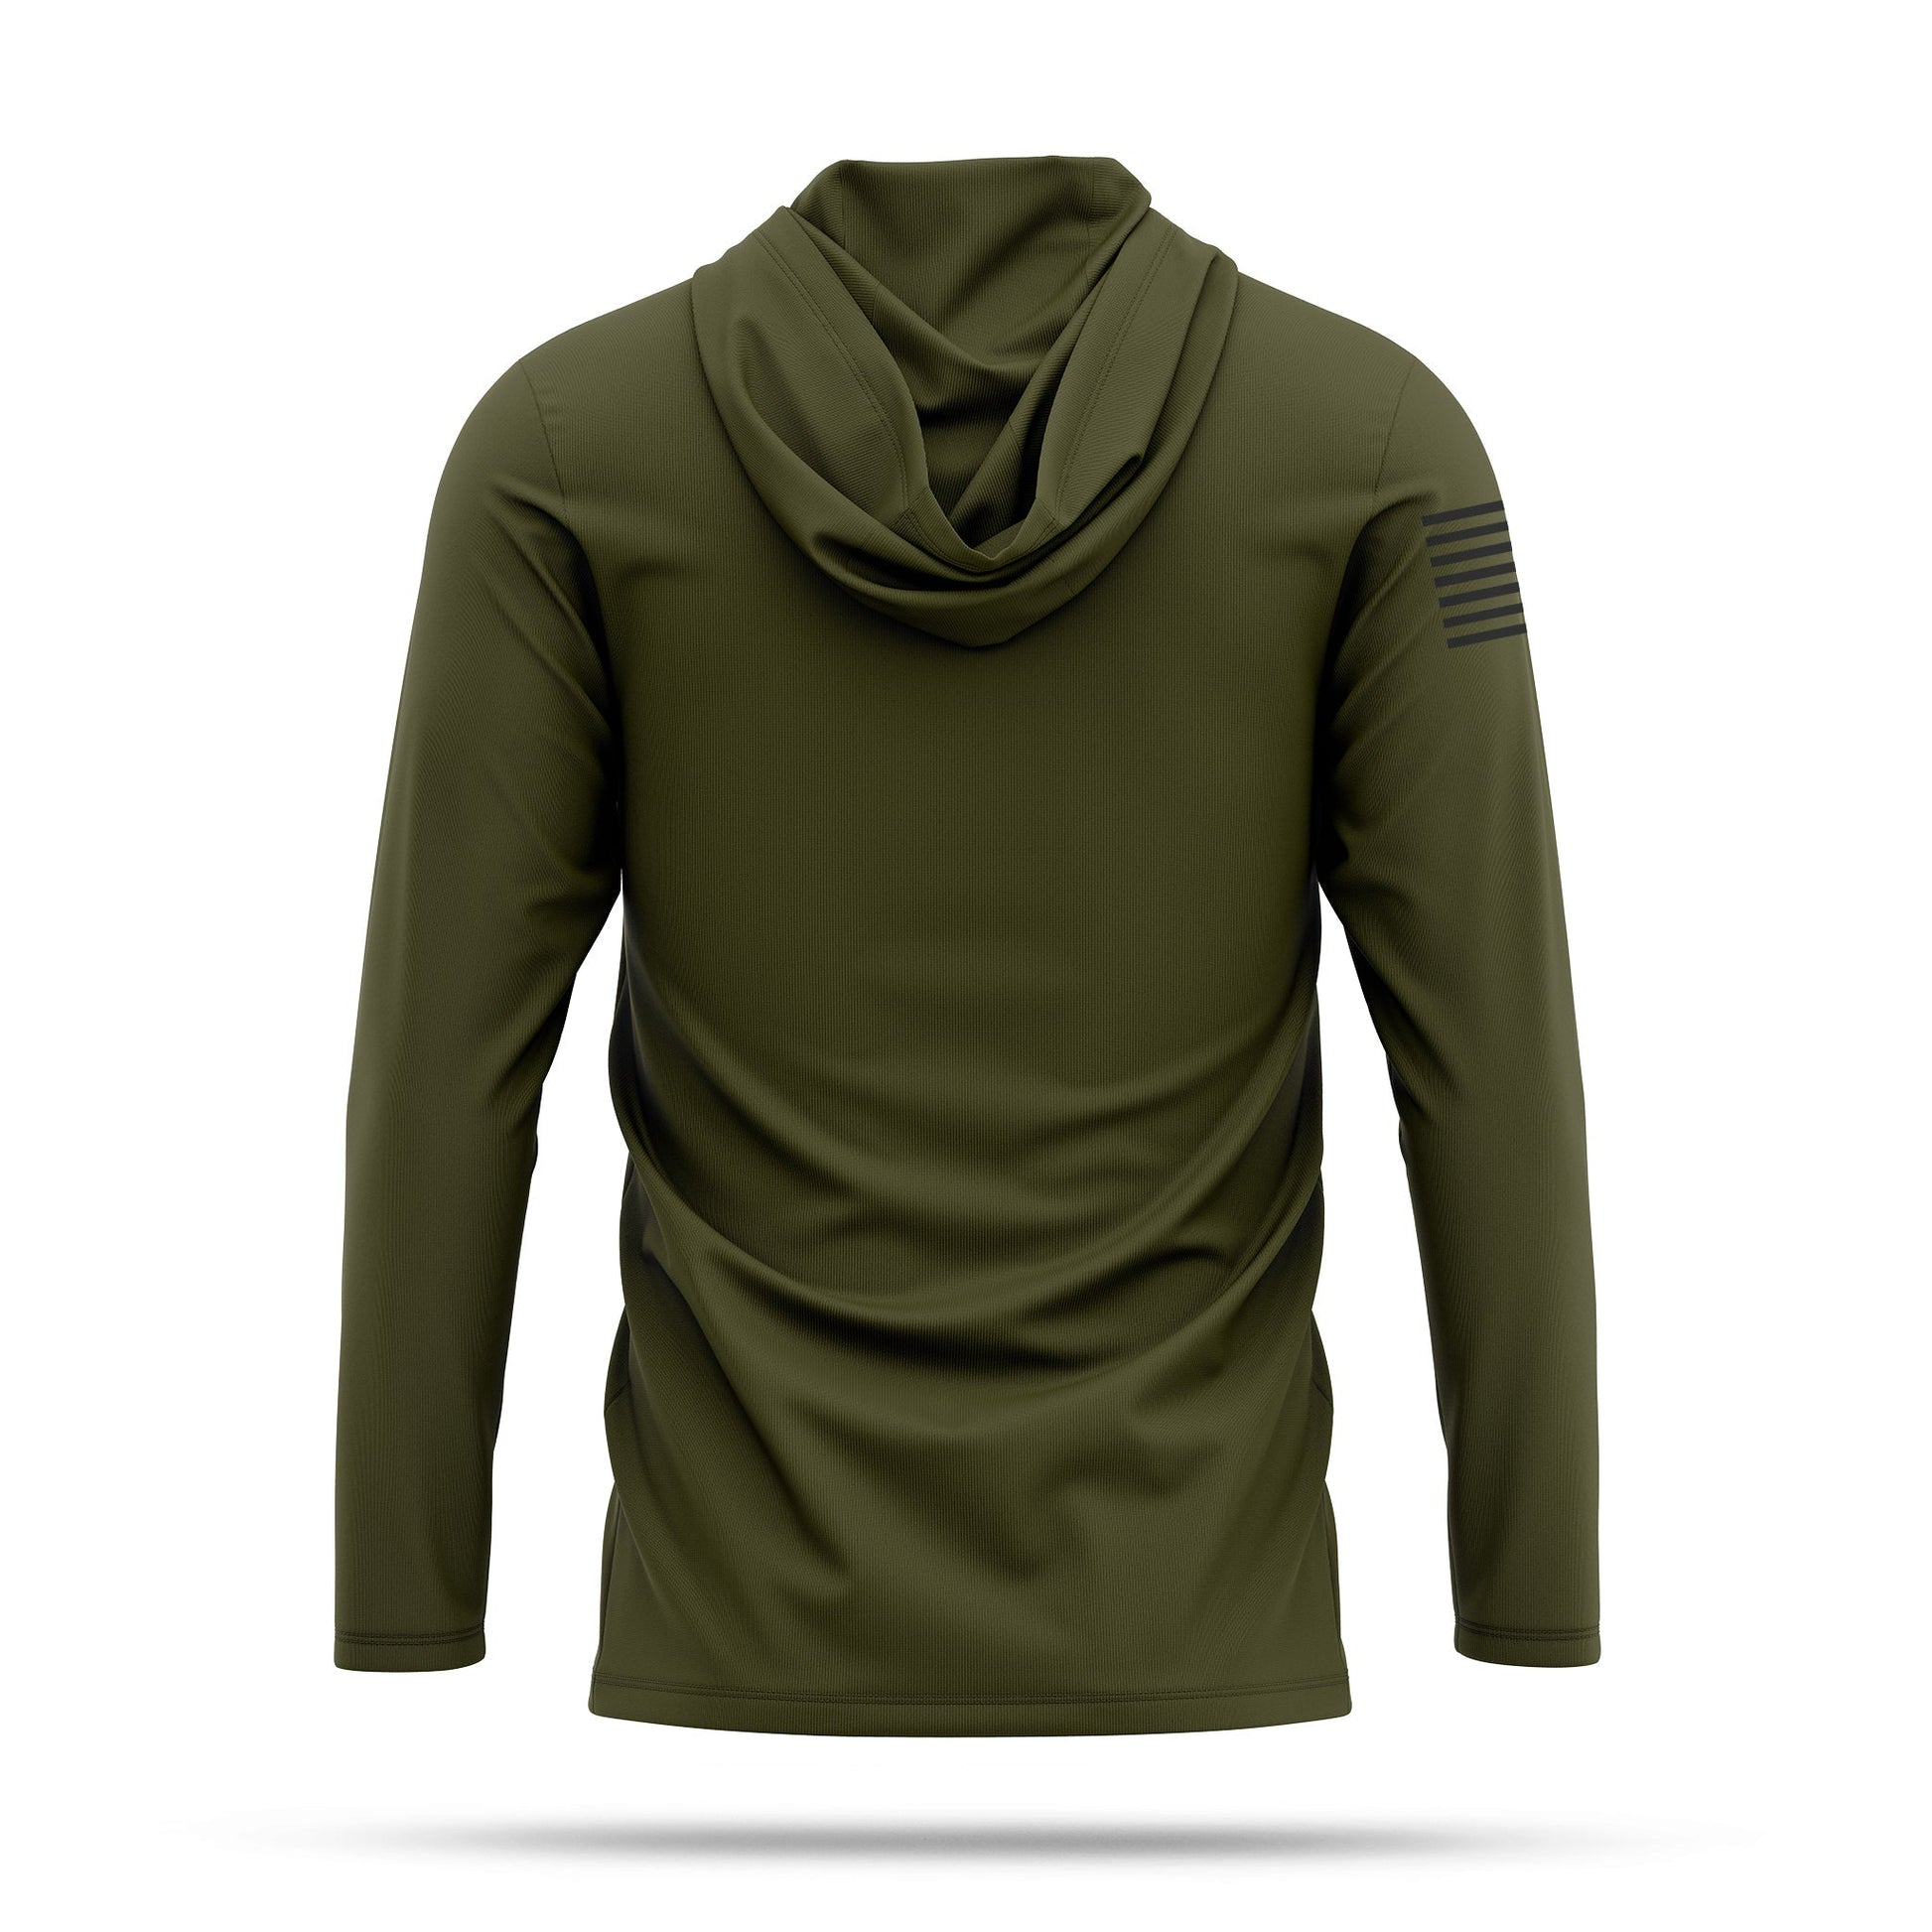 [UNMARKED] Men's Performance Hooded Long Sleeve [GRN]-13 Fifty Apparel